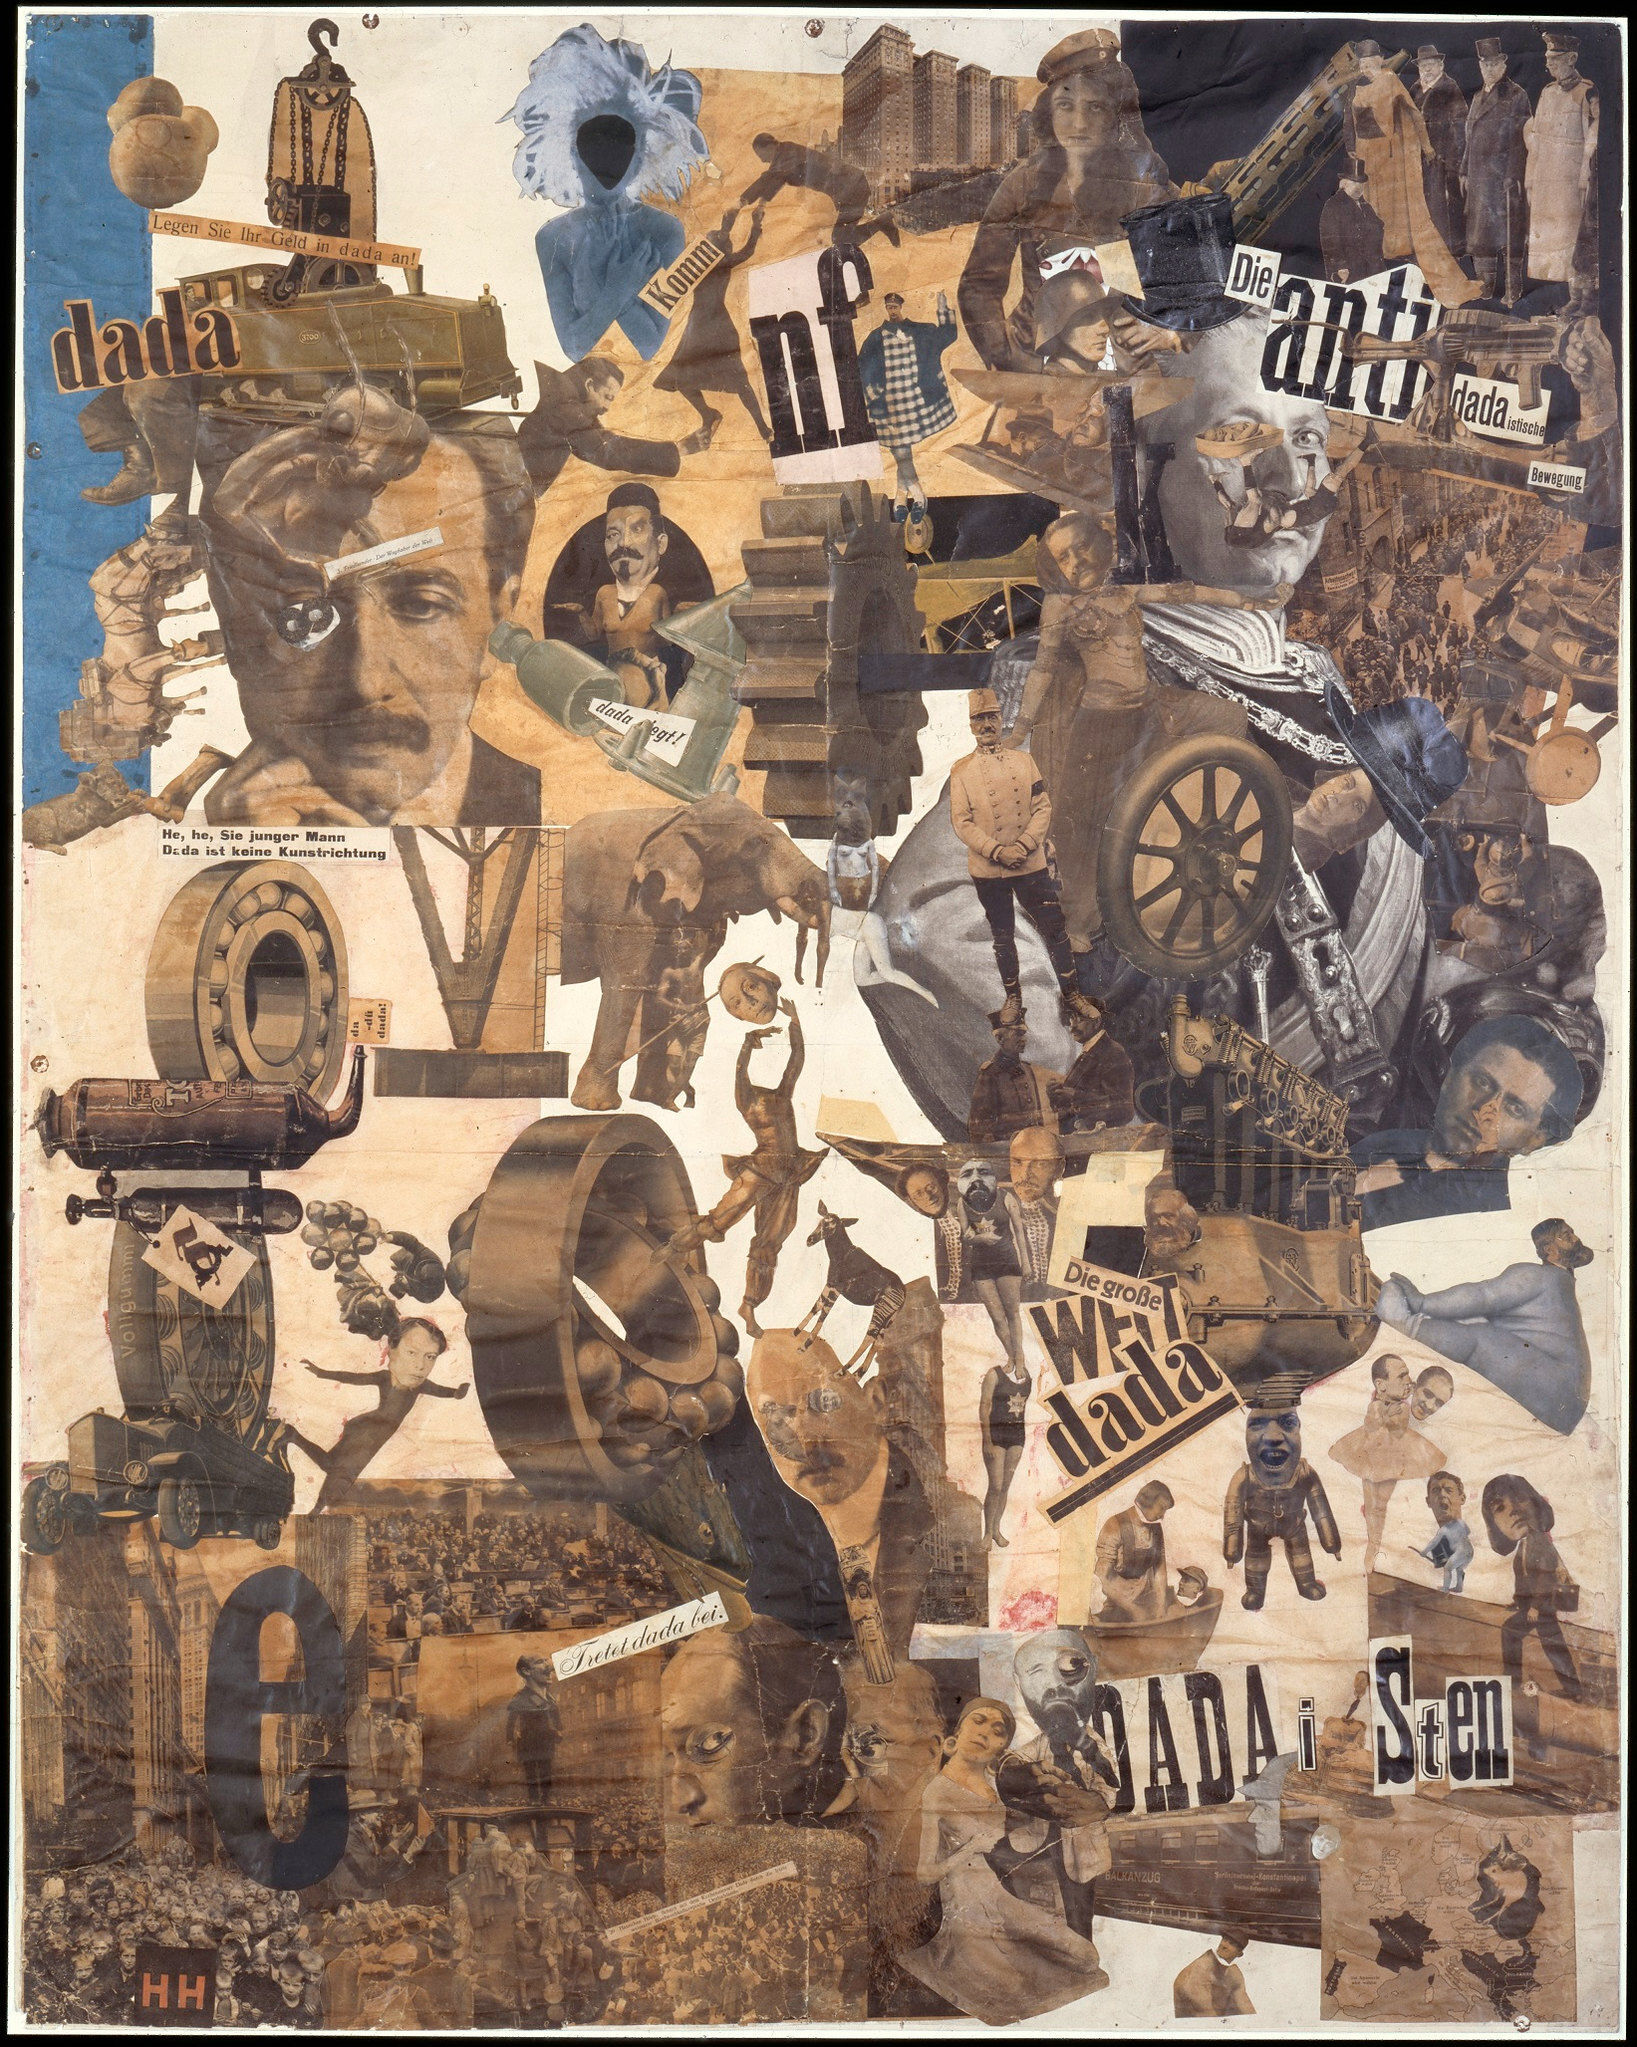 Hannah Höch, Cut with the Kitchen Knife through the Last Weimar Beer-Belly Cultural Epoch in Germany, fotomontaggio e collage con acquerello, 1919-1920, 114 x 90 cm, Nationalgalerie, Staatliche Museen, Berlin